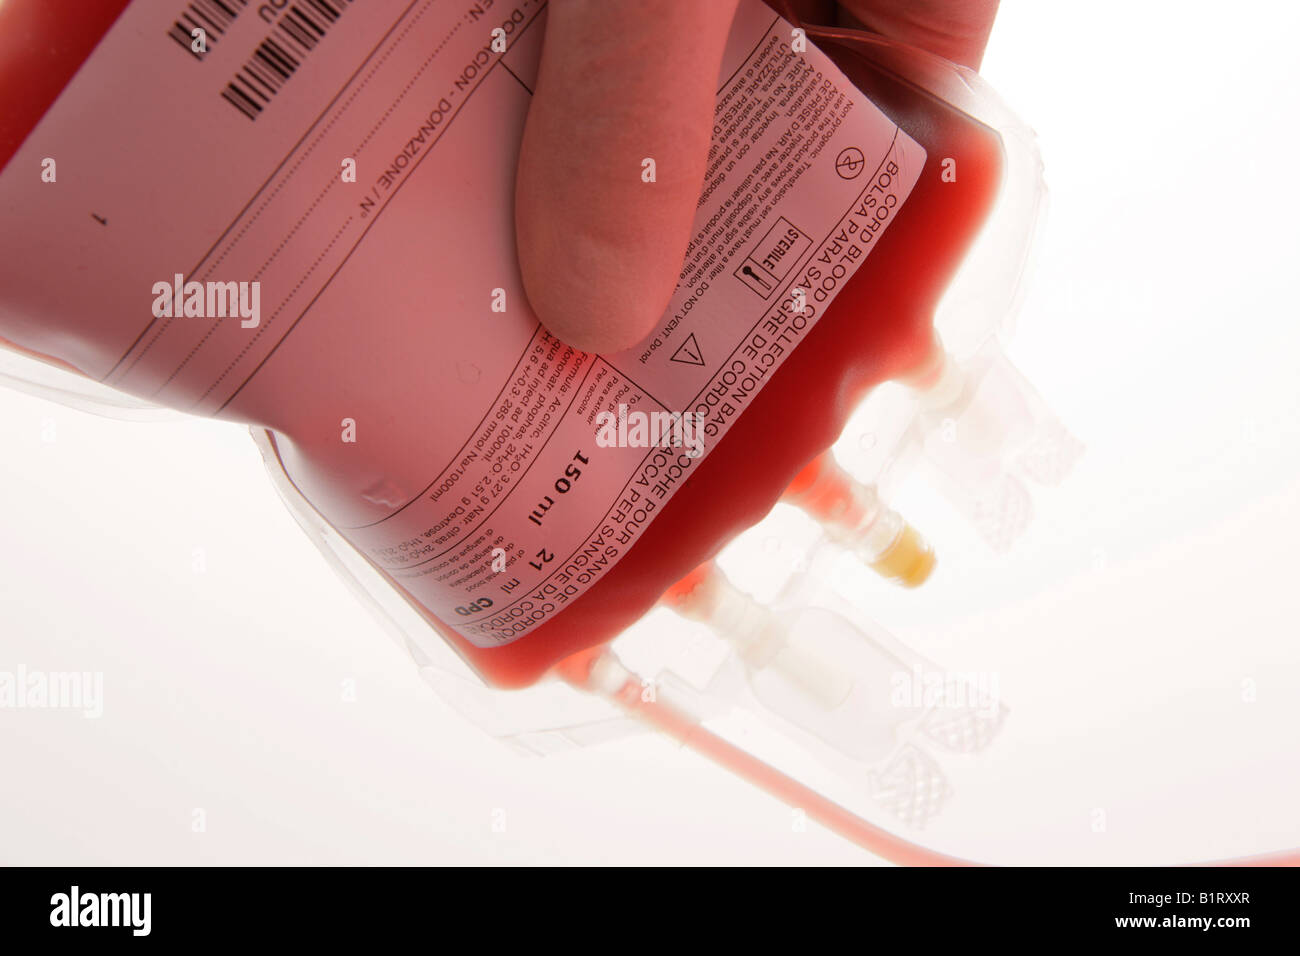 Stored Blood Stock Photo